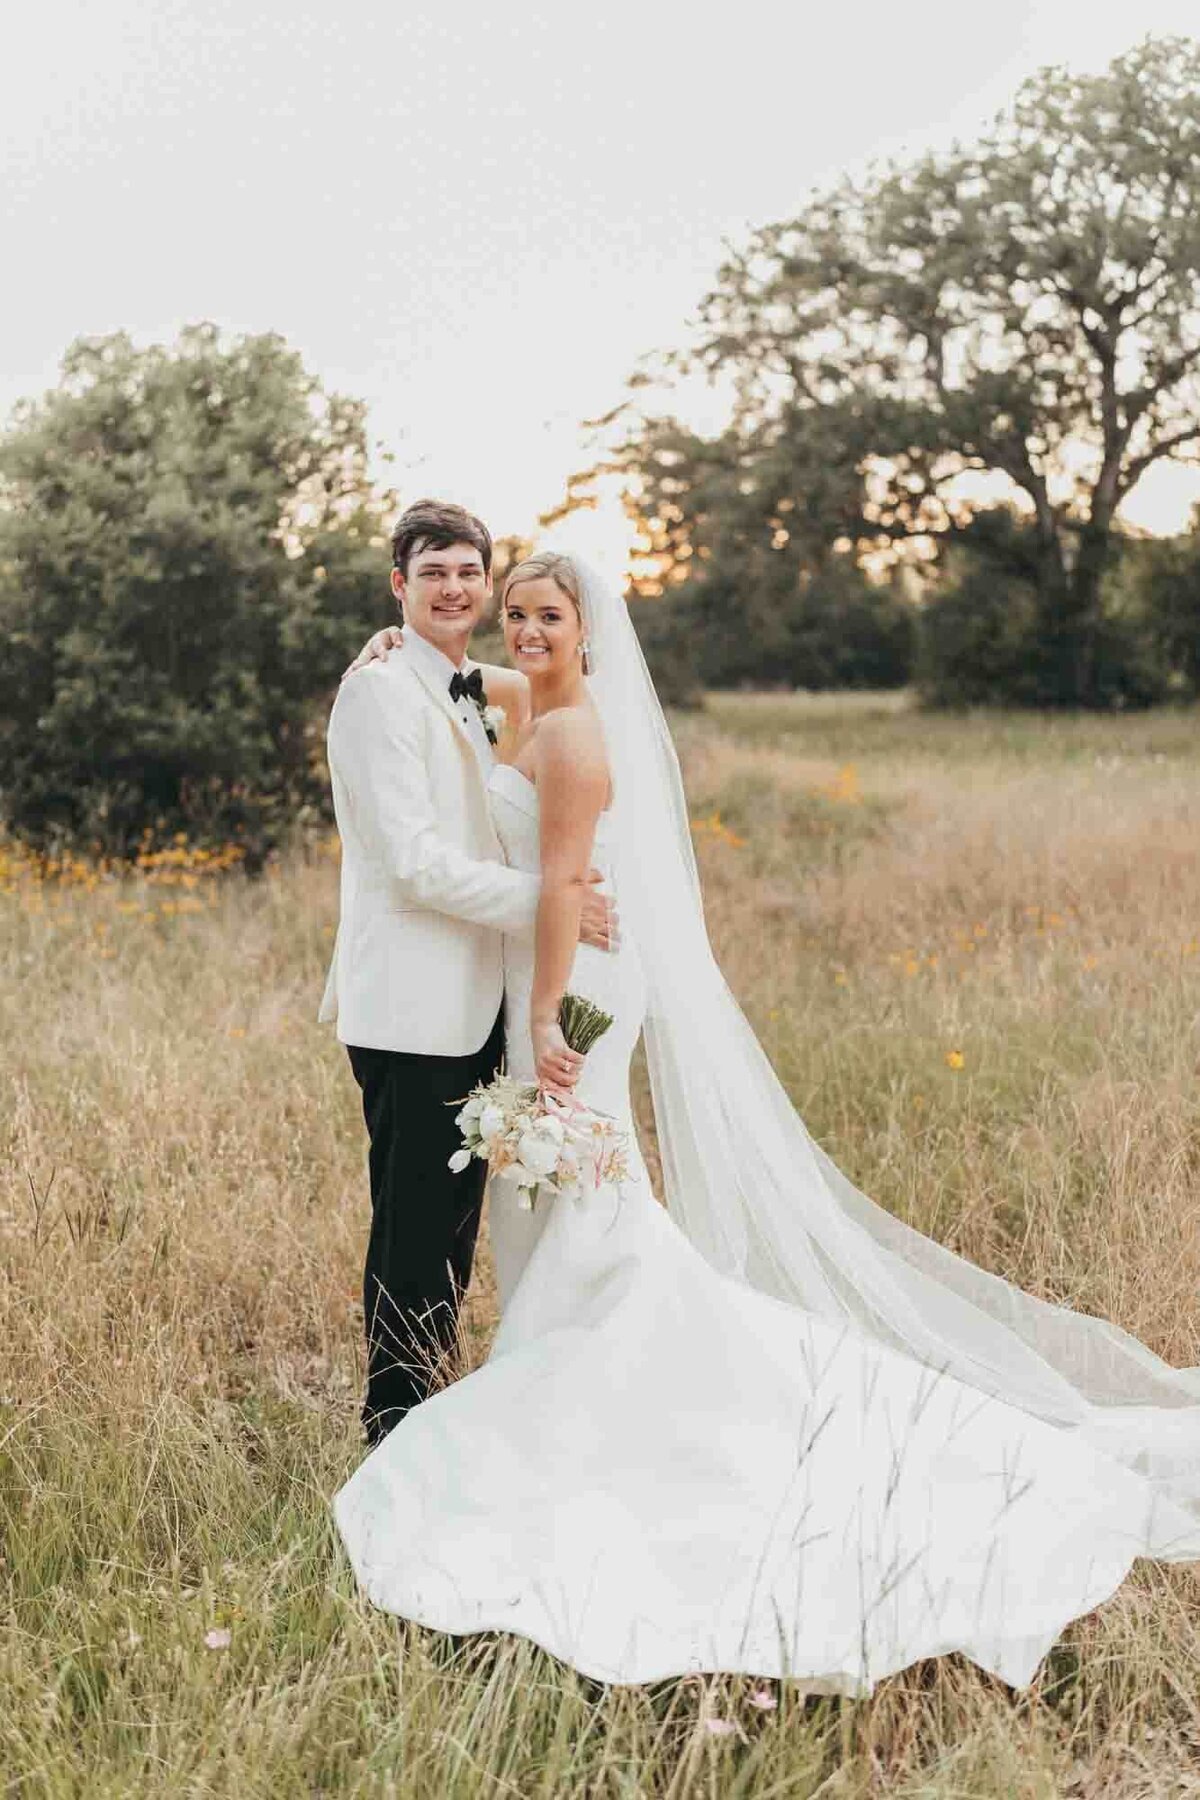 bride and groom smile at camera and hold each other during golden hour photos.